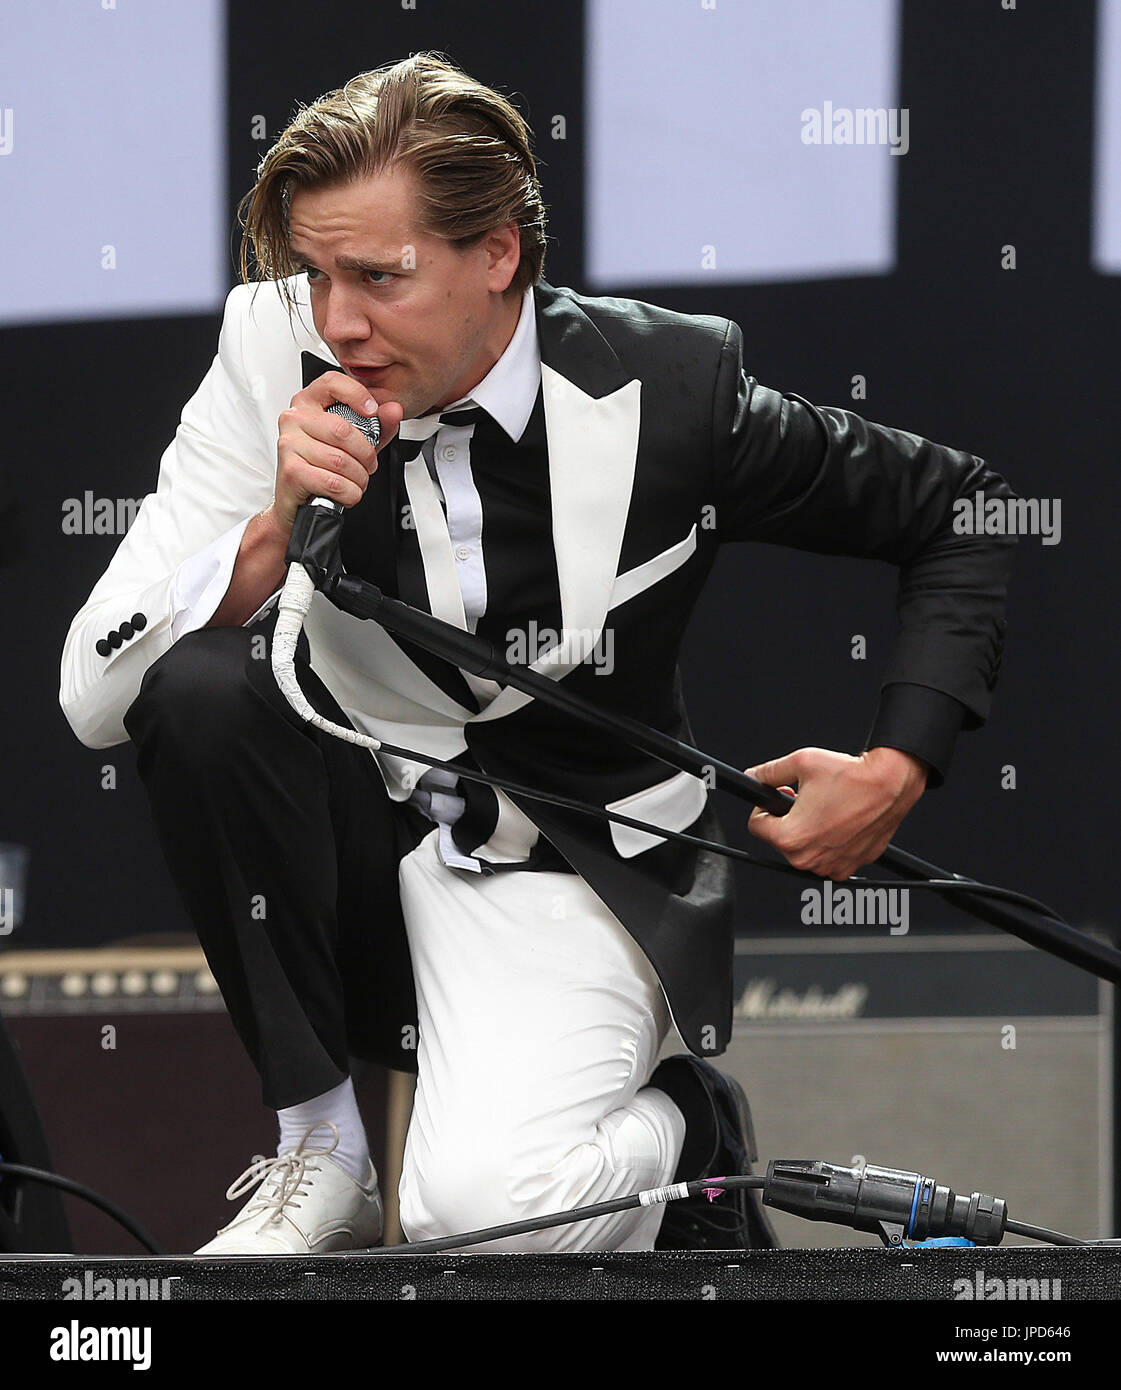 The Hives perform at BST Featuring: The Hives, Howlin' Pelle Almqvist  Where: London, United Kingdom When: 01 Jul 2017 Credit: WENN.com Stock  Photo - Alamy